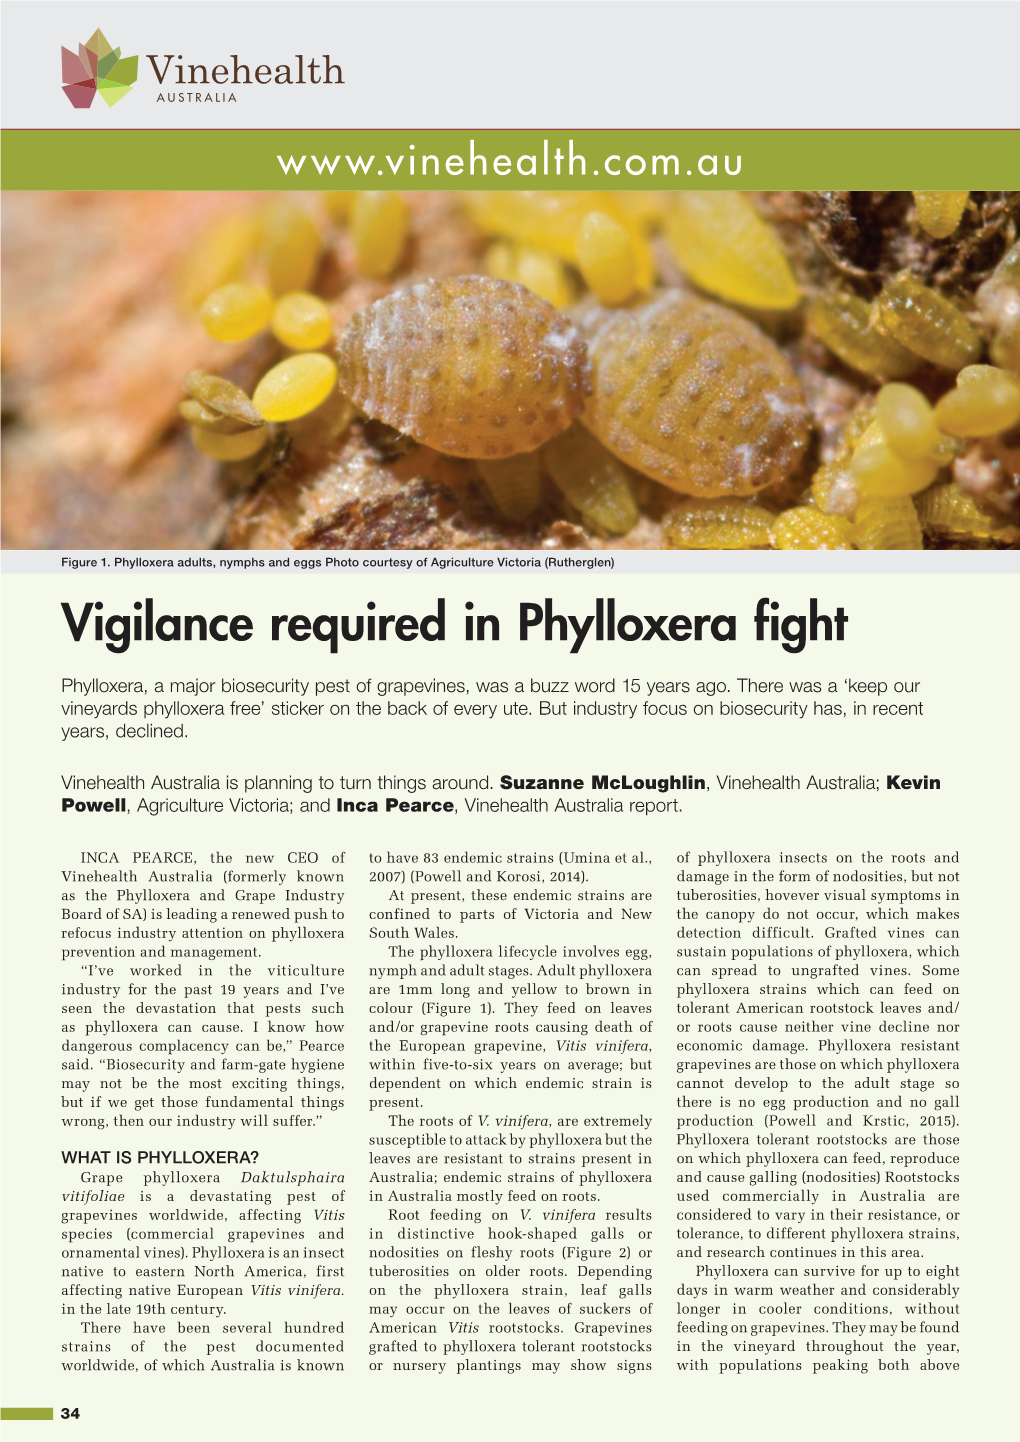 Vigilance Required in Phylloxera Fight